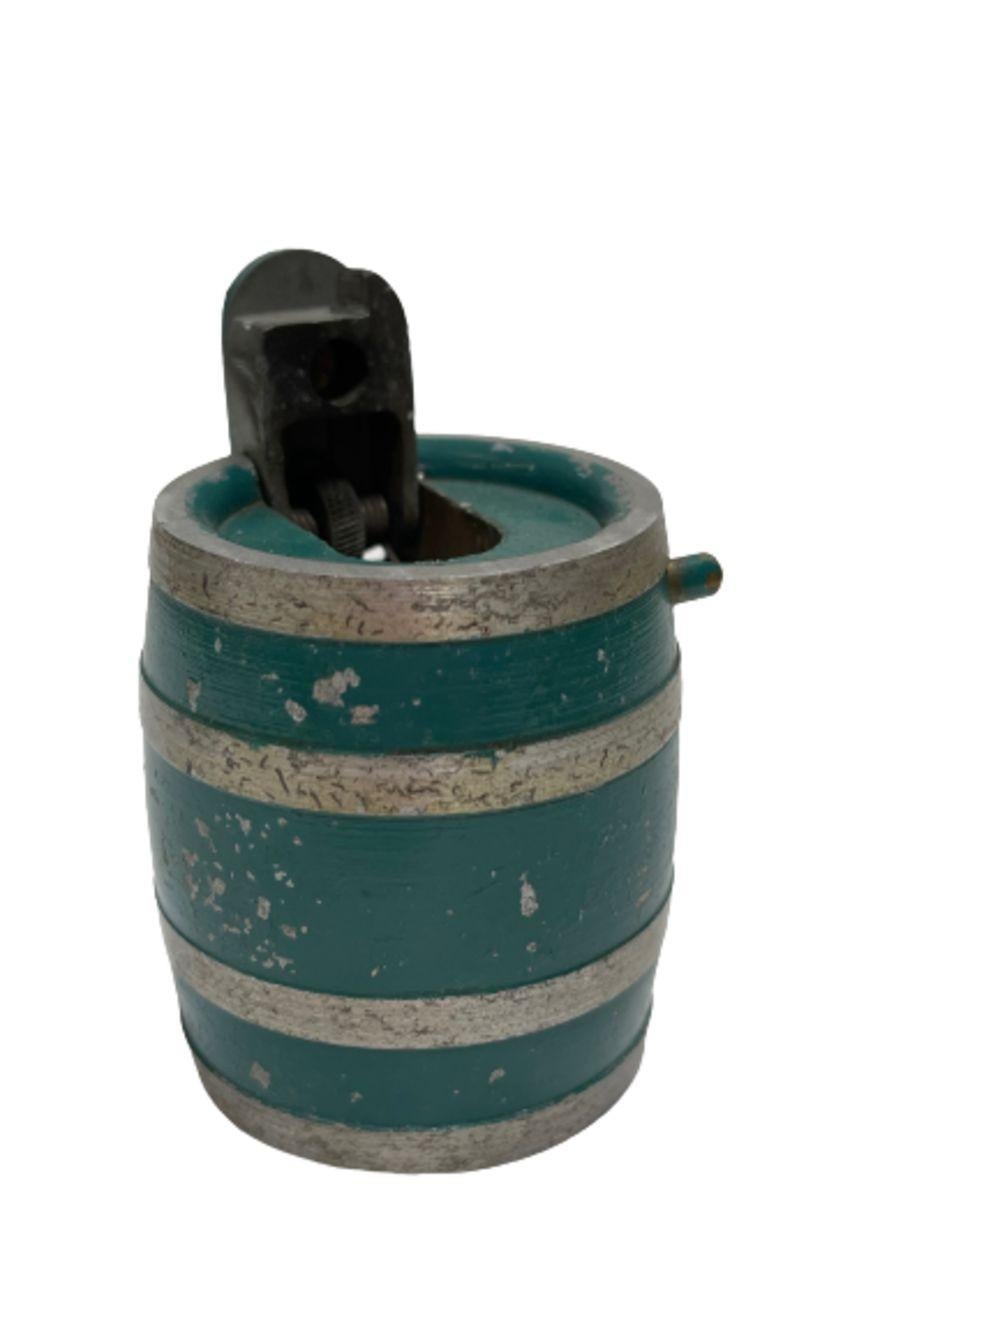 Working Baier / Gesch figural beer barrel semi-automatic lighter. Great piece that was made as a souvenir in the late 1940's/early 1950s. To activate, just press the button on the side. This one was sold in Hanau, a city close to Frankfurt.